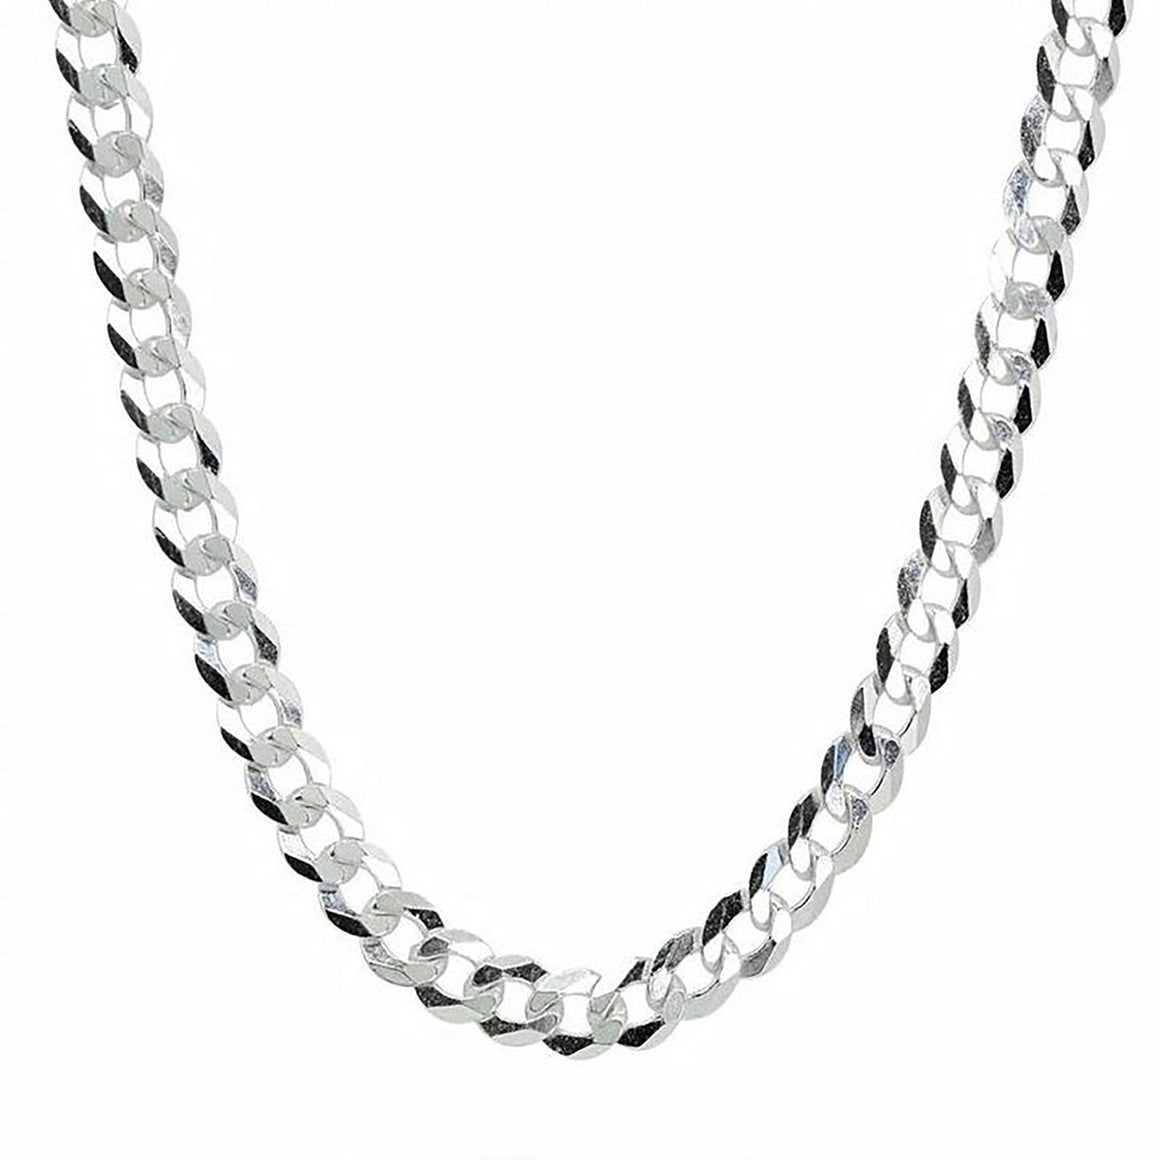 54 FLORAL 12mm CURB 925 STERLING SILVER NECKLACE CHAIN